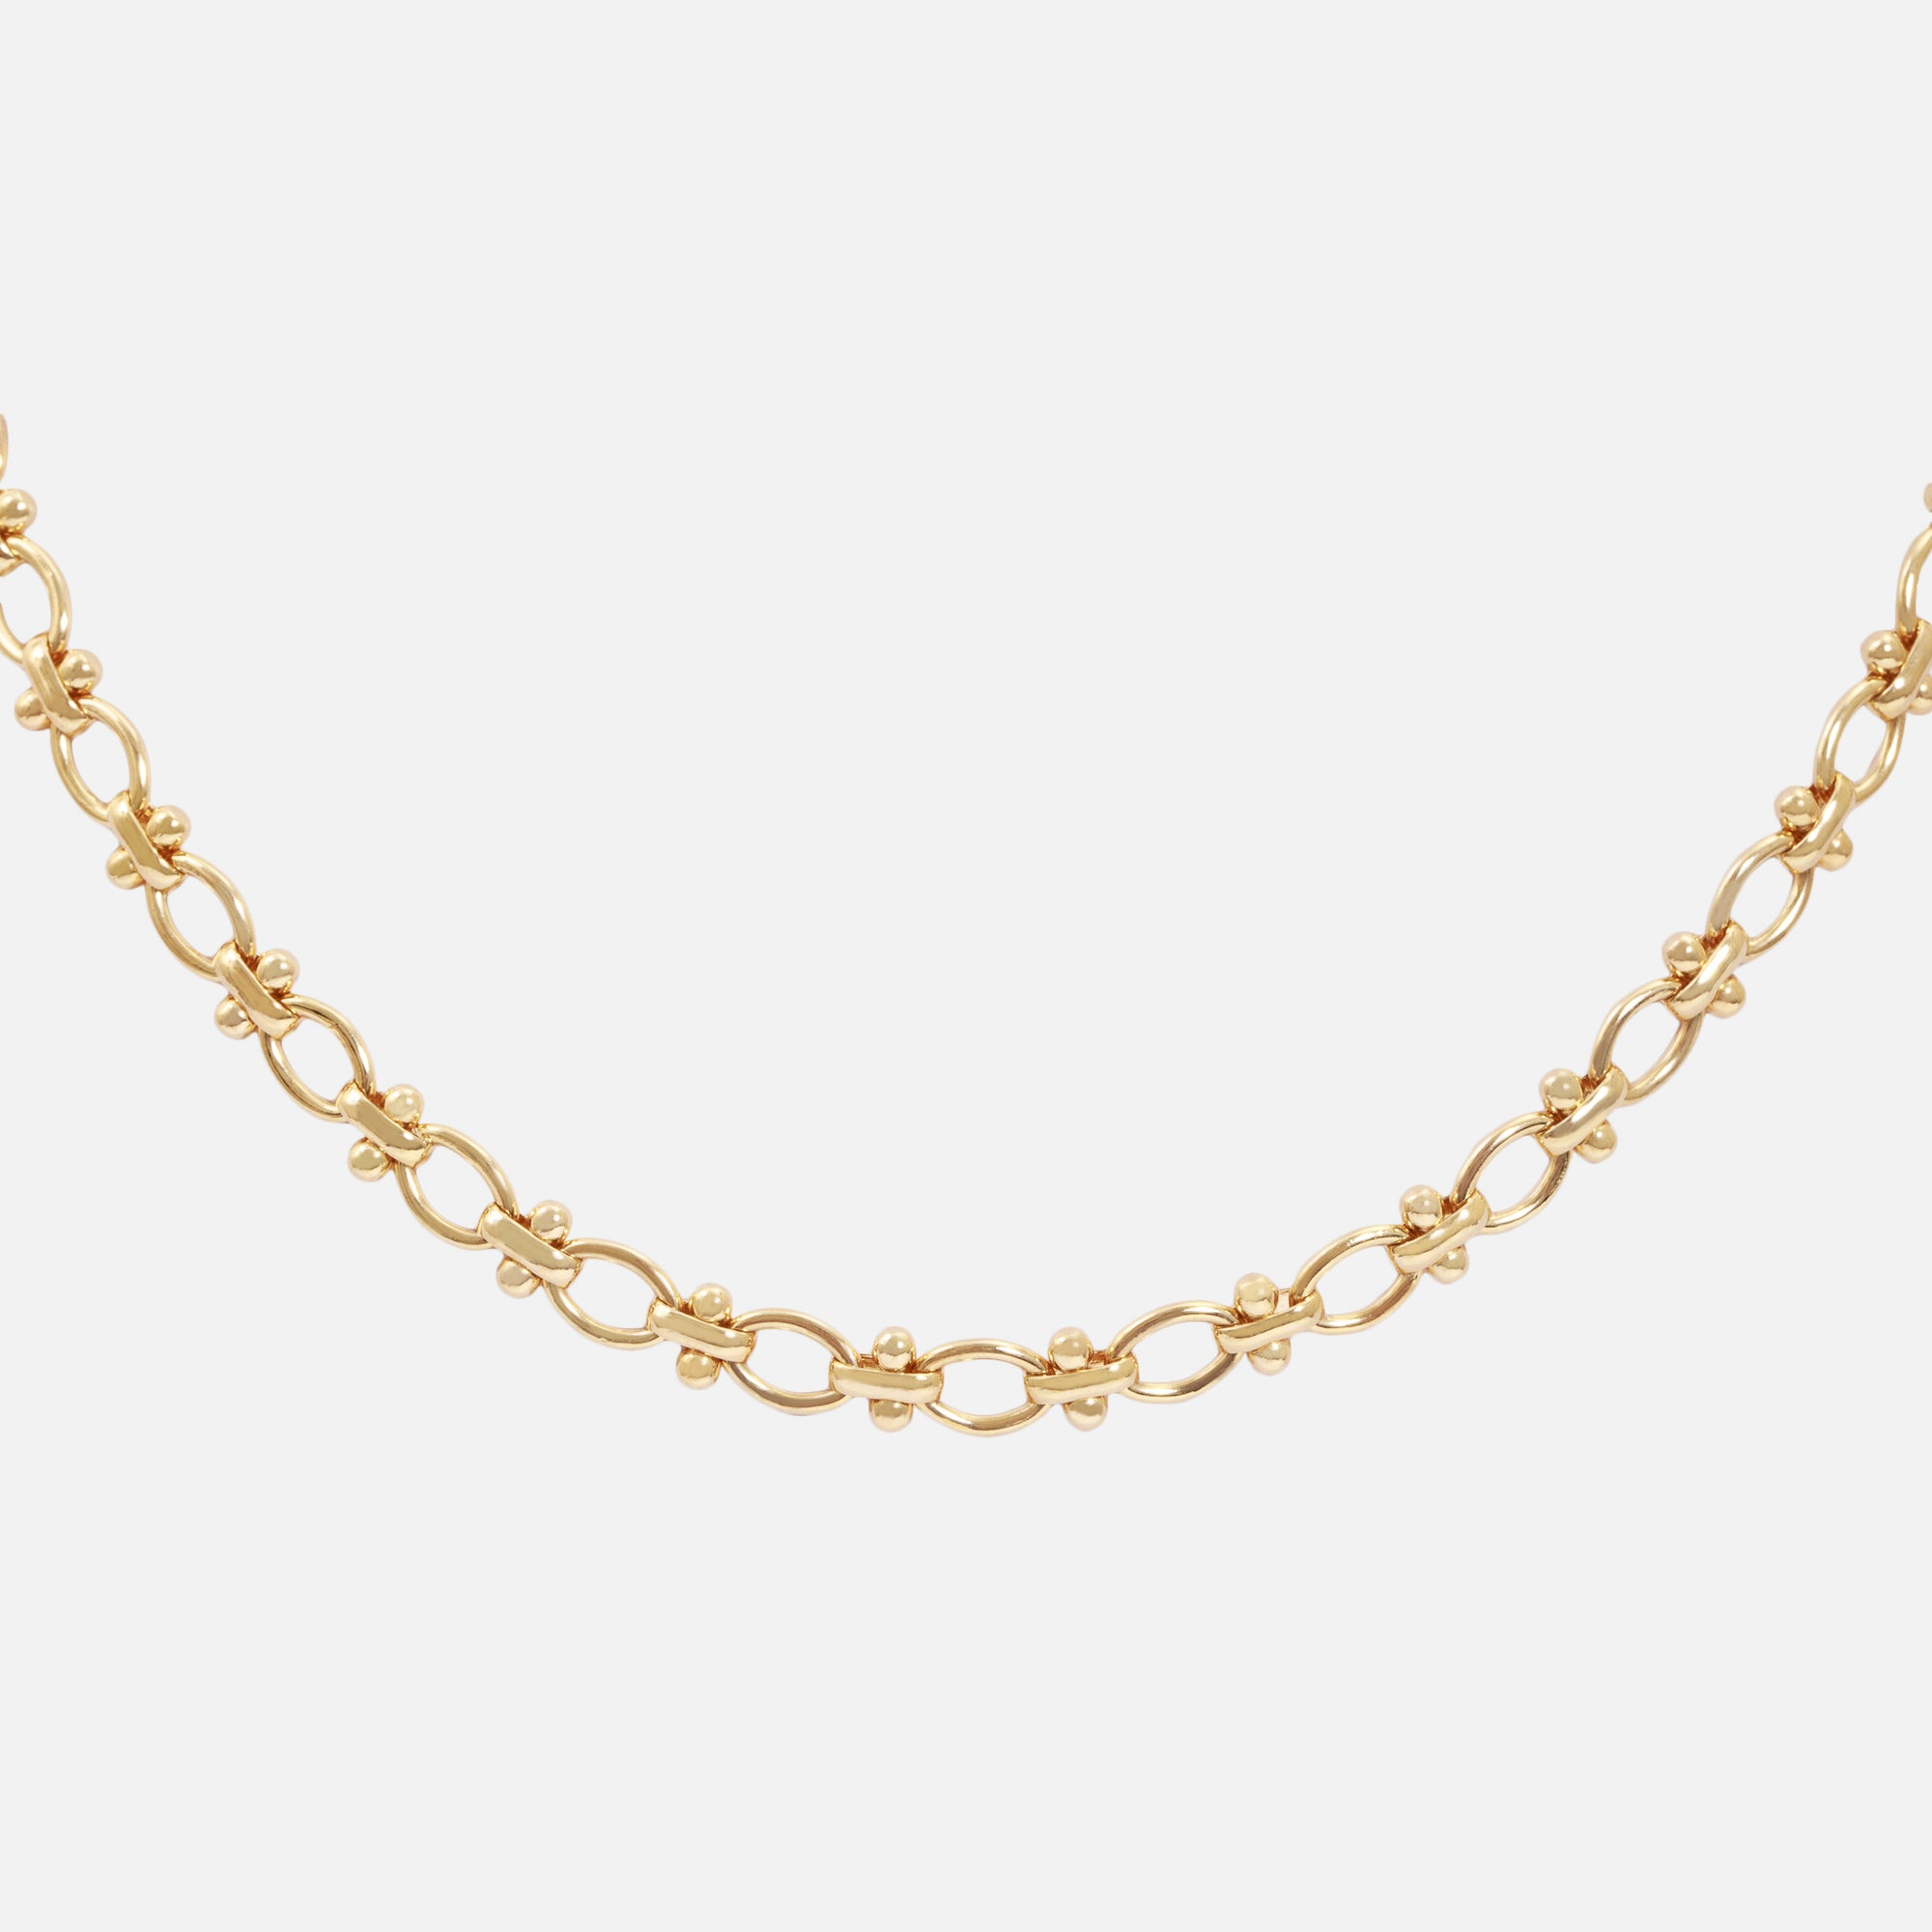 Golden necklace with wide links 18 inches